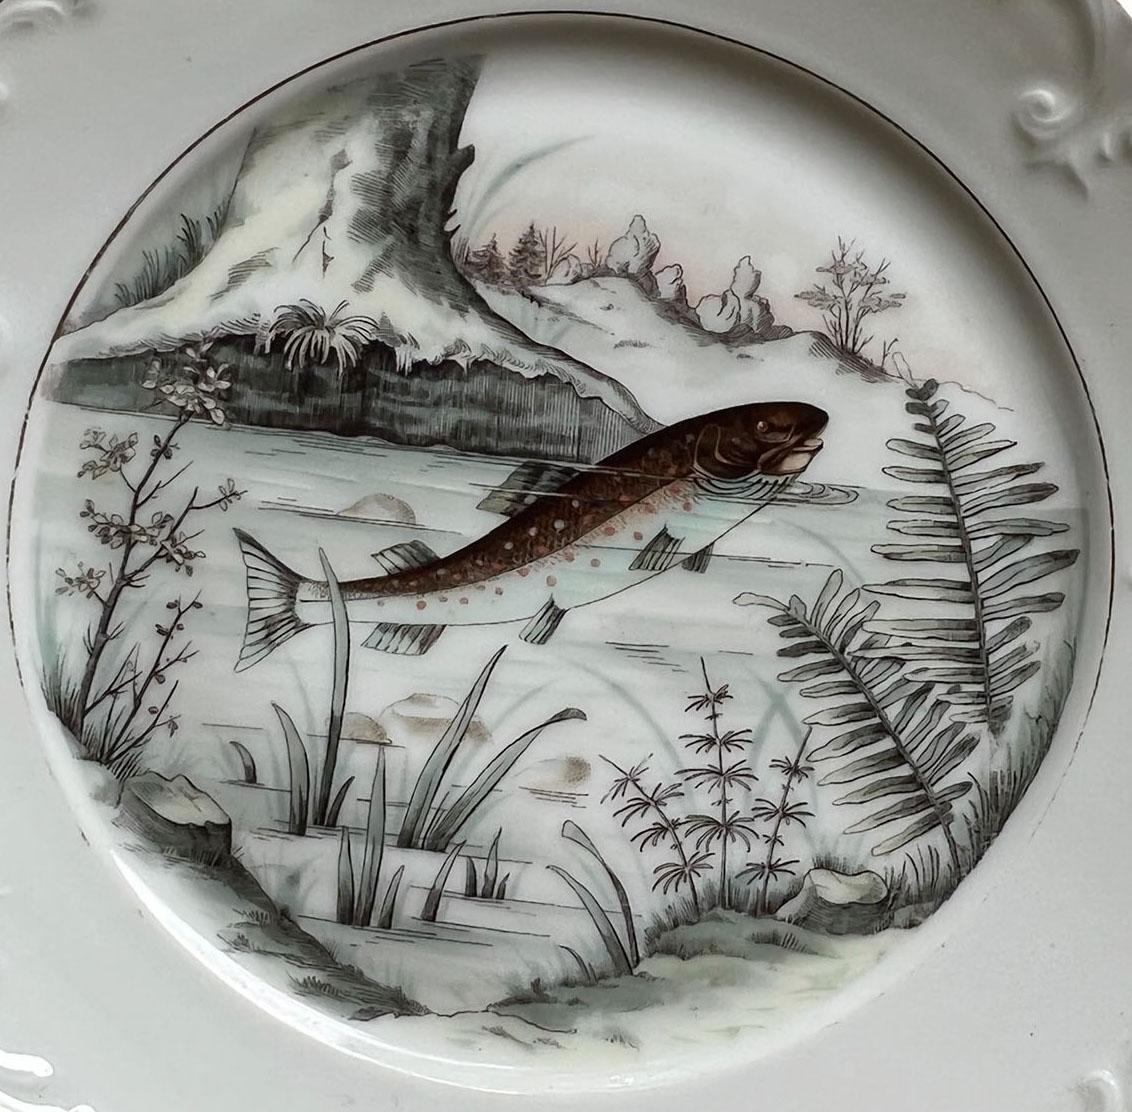 A beautiful white porcelain plate with scrolls and gilt trim. Plate has a hand painted fish in muted colors. One of my favorites, so delicate. No makers marks.